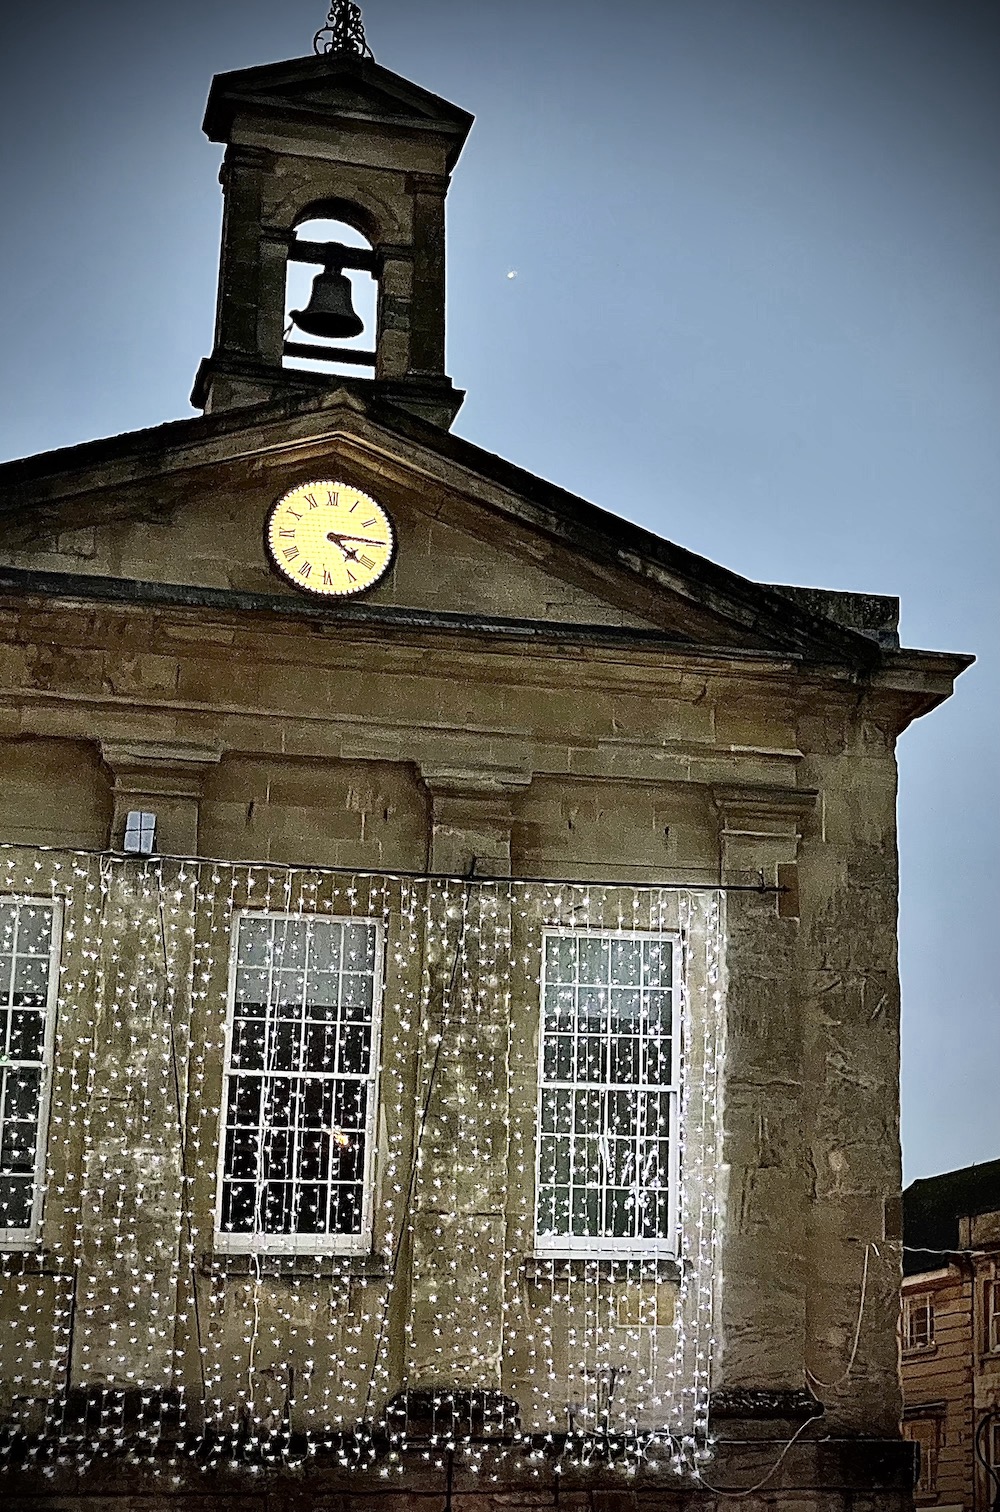 Chipping norton christmas lights on town hall with big town bell and clock